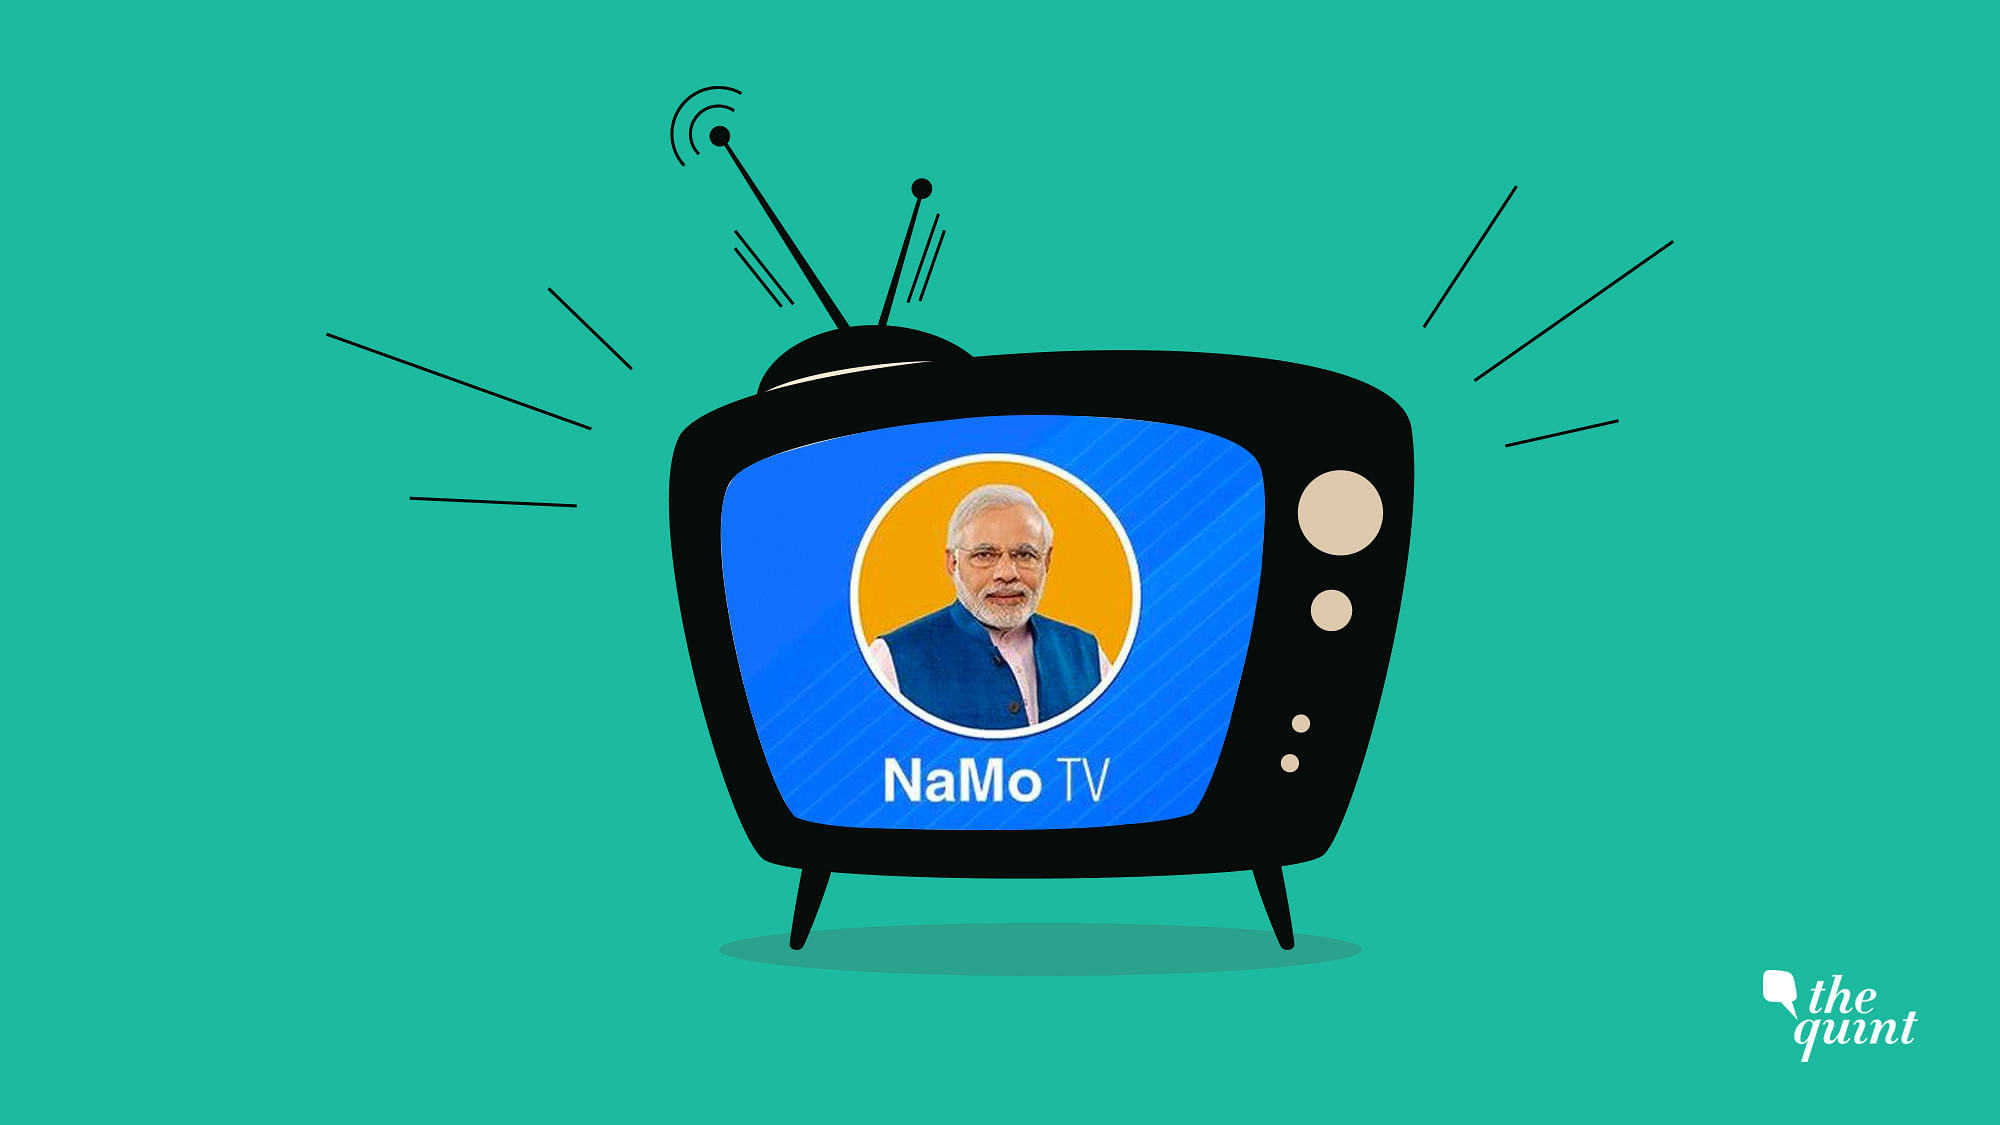 The I&amp;B Ministry has reportedly said that NaMo TV is an ad platform launched by DTH service providers.